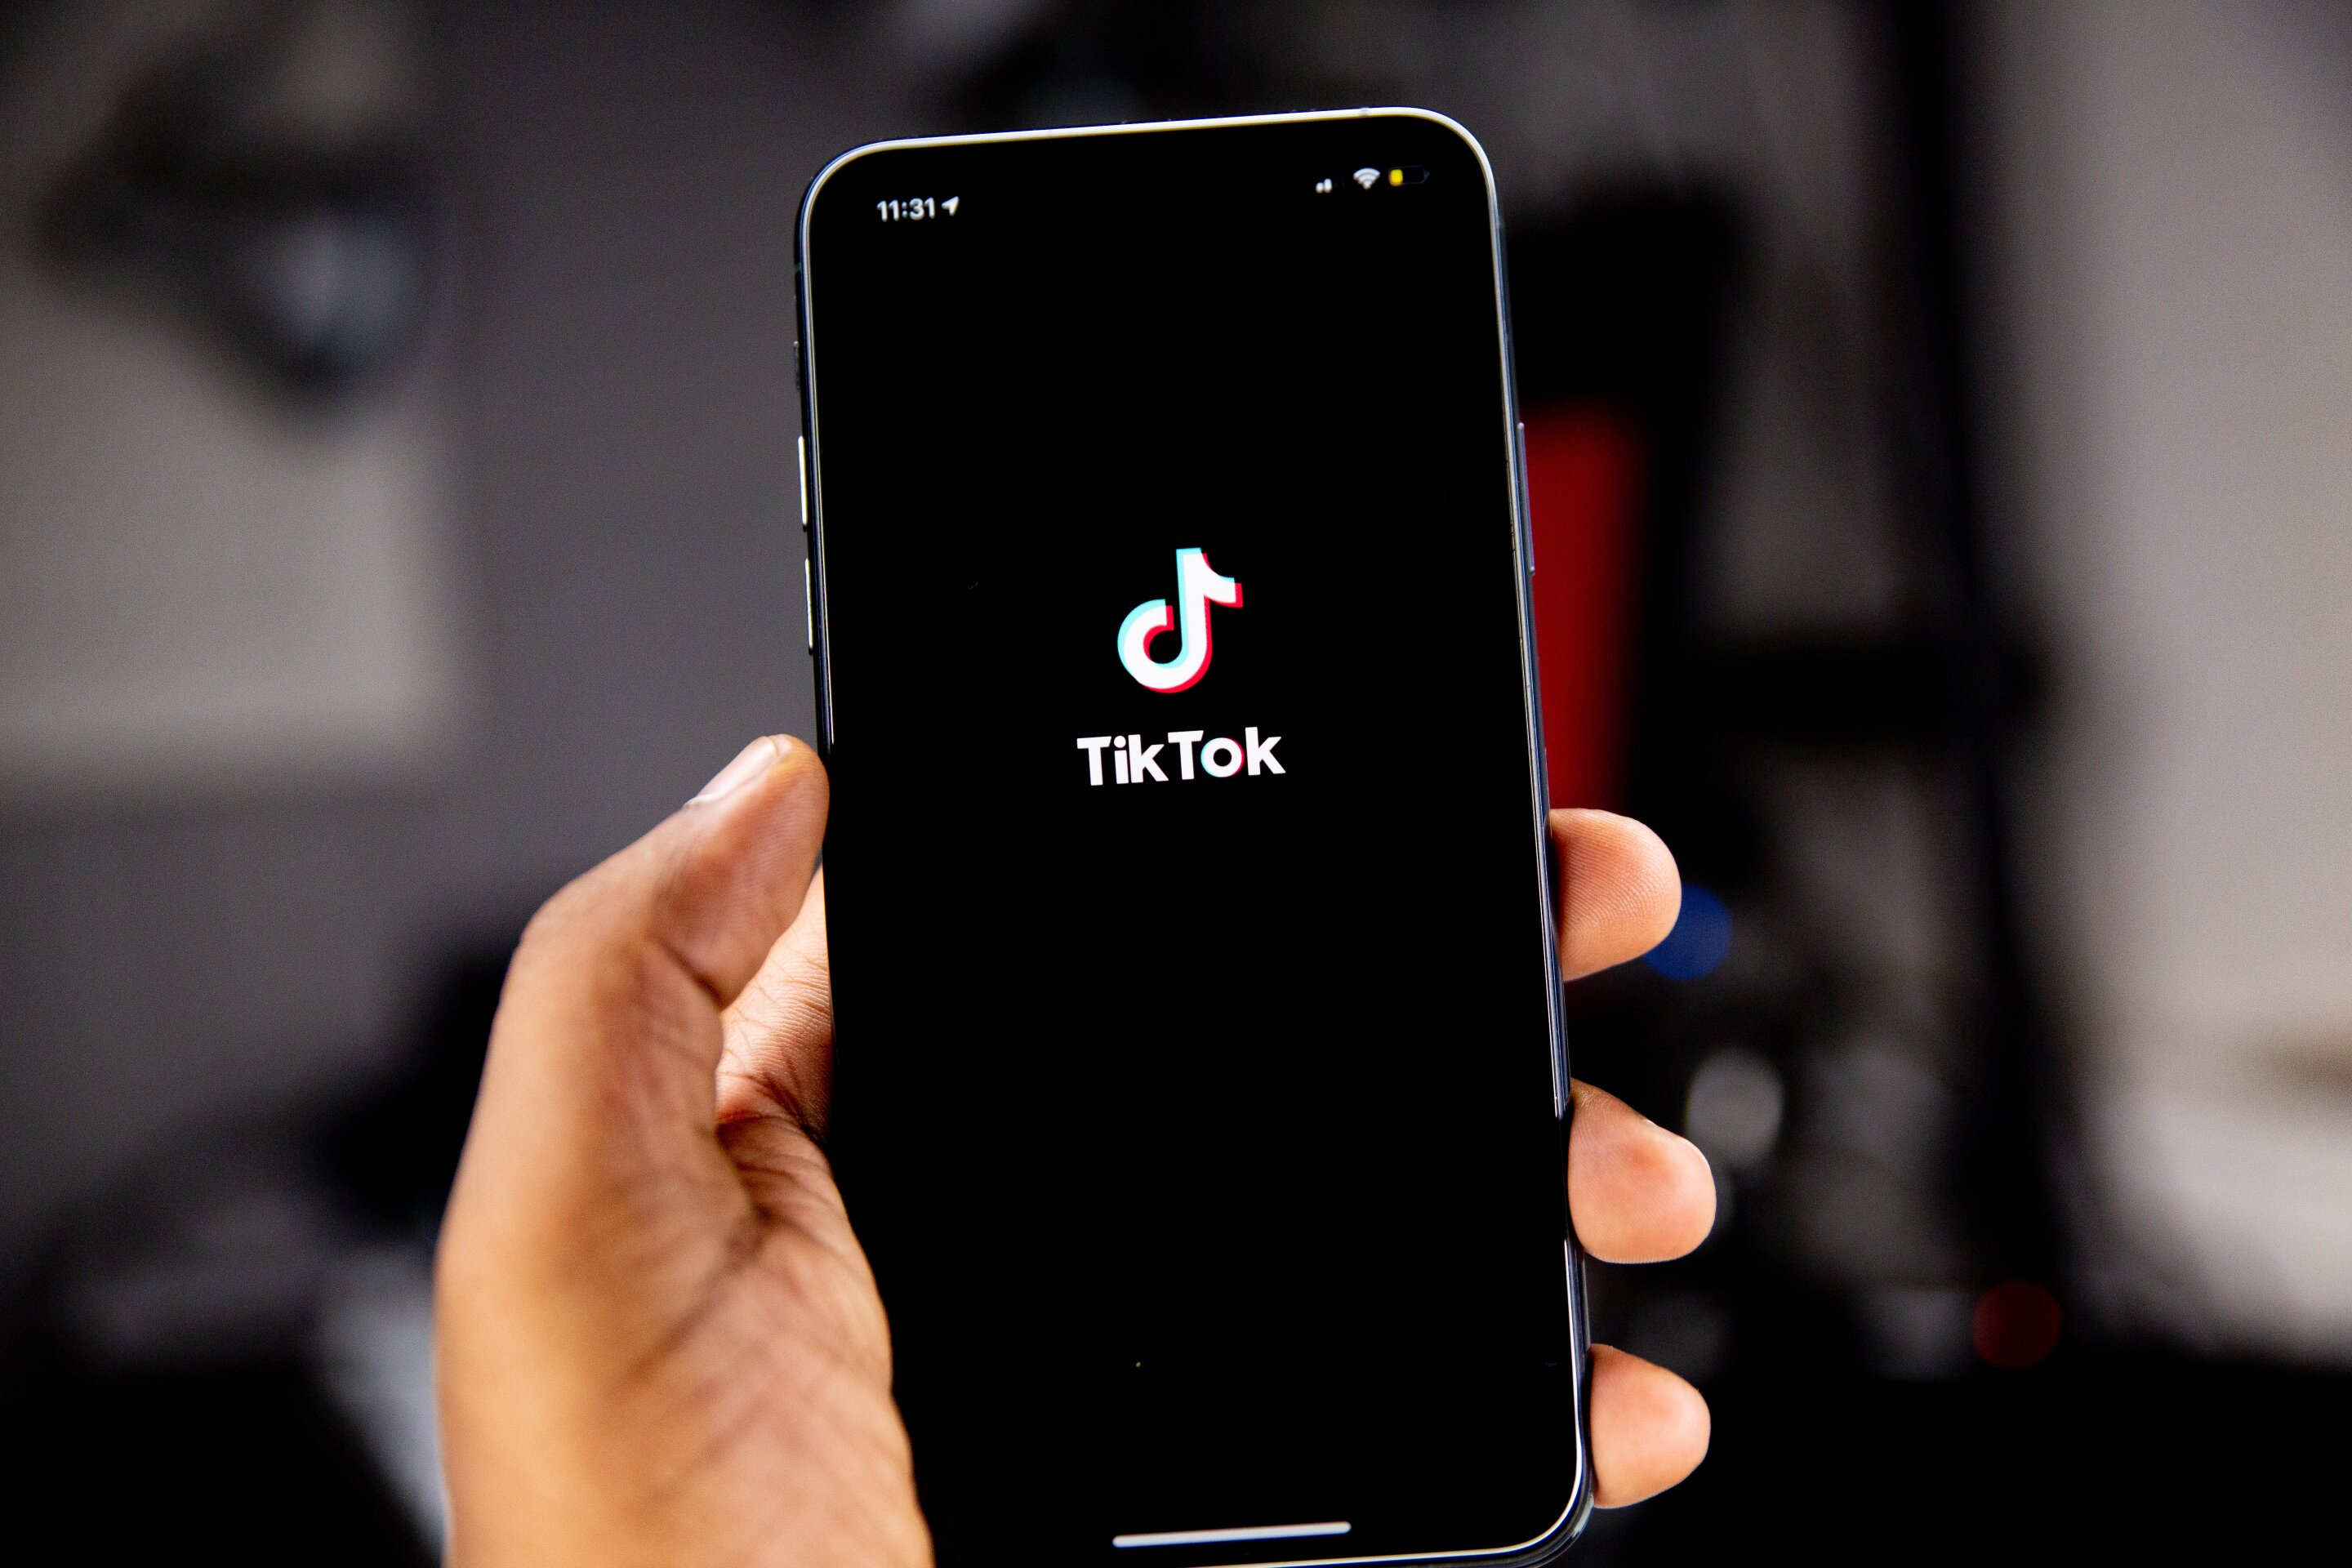 Mexican college students intoxicated by TikTok problem